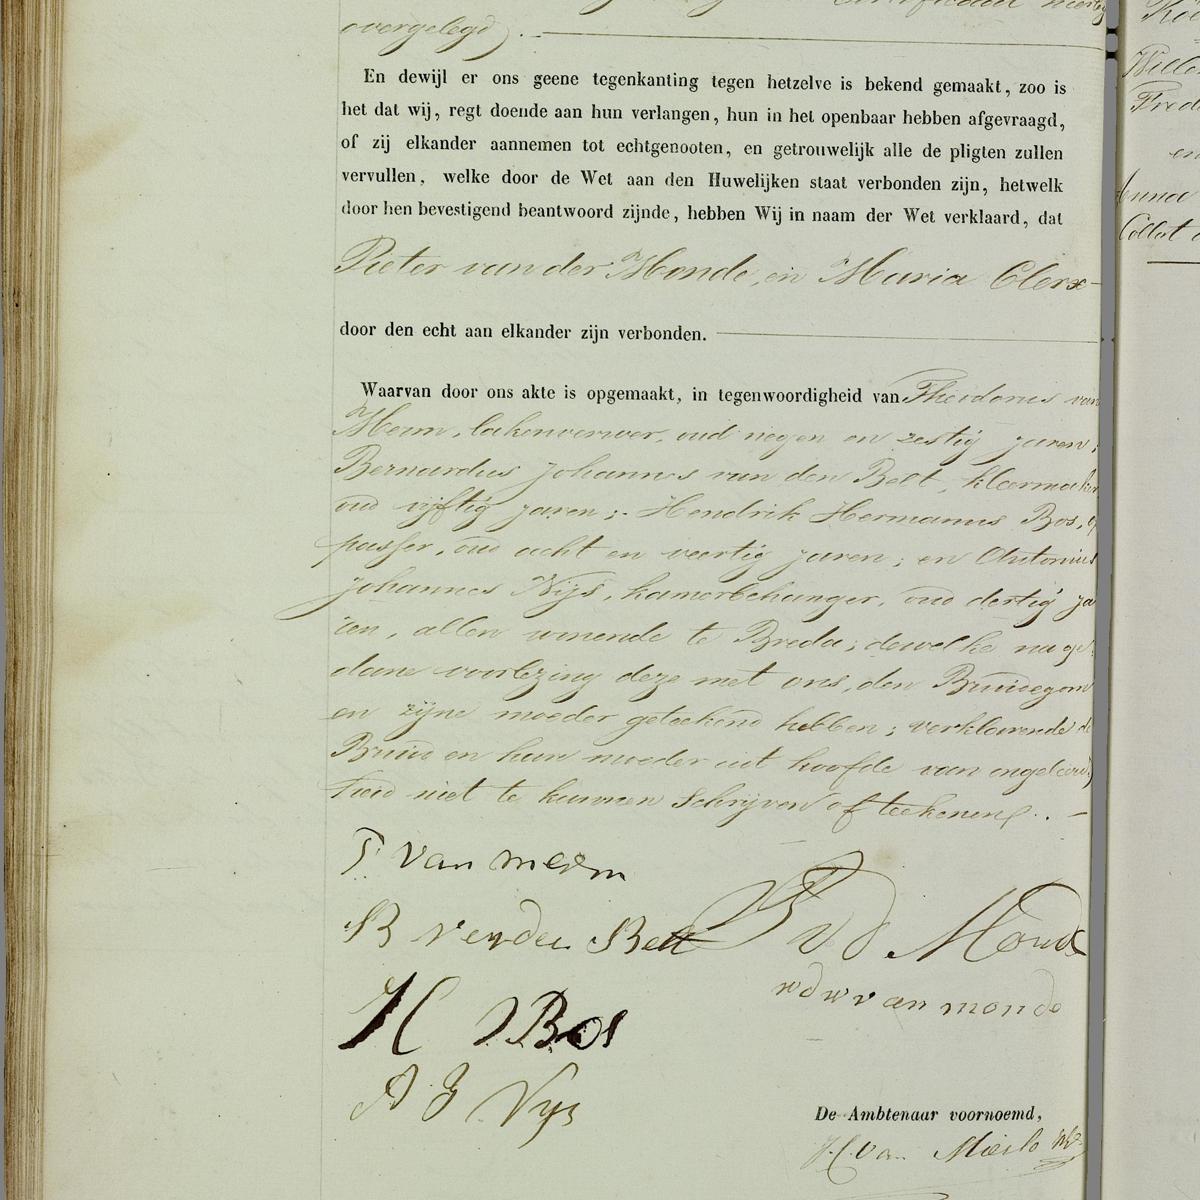 Civil registry of marriages, Breda, 1859, record 75, left page